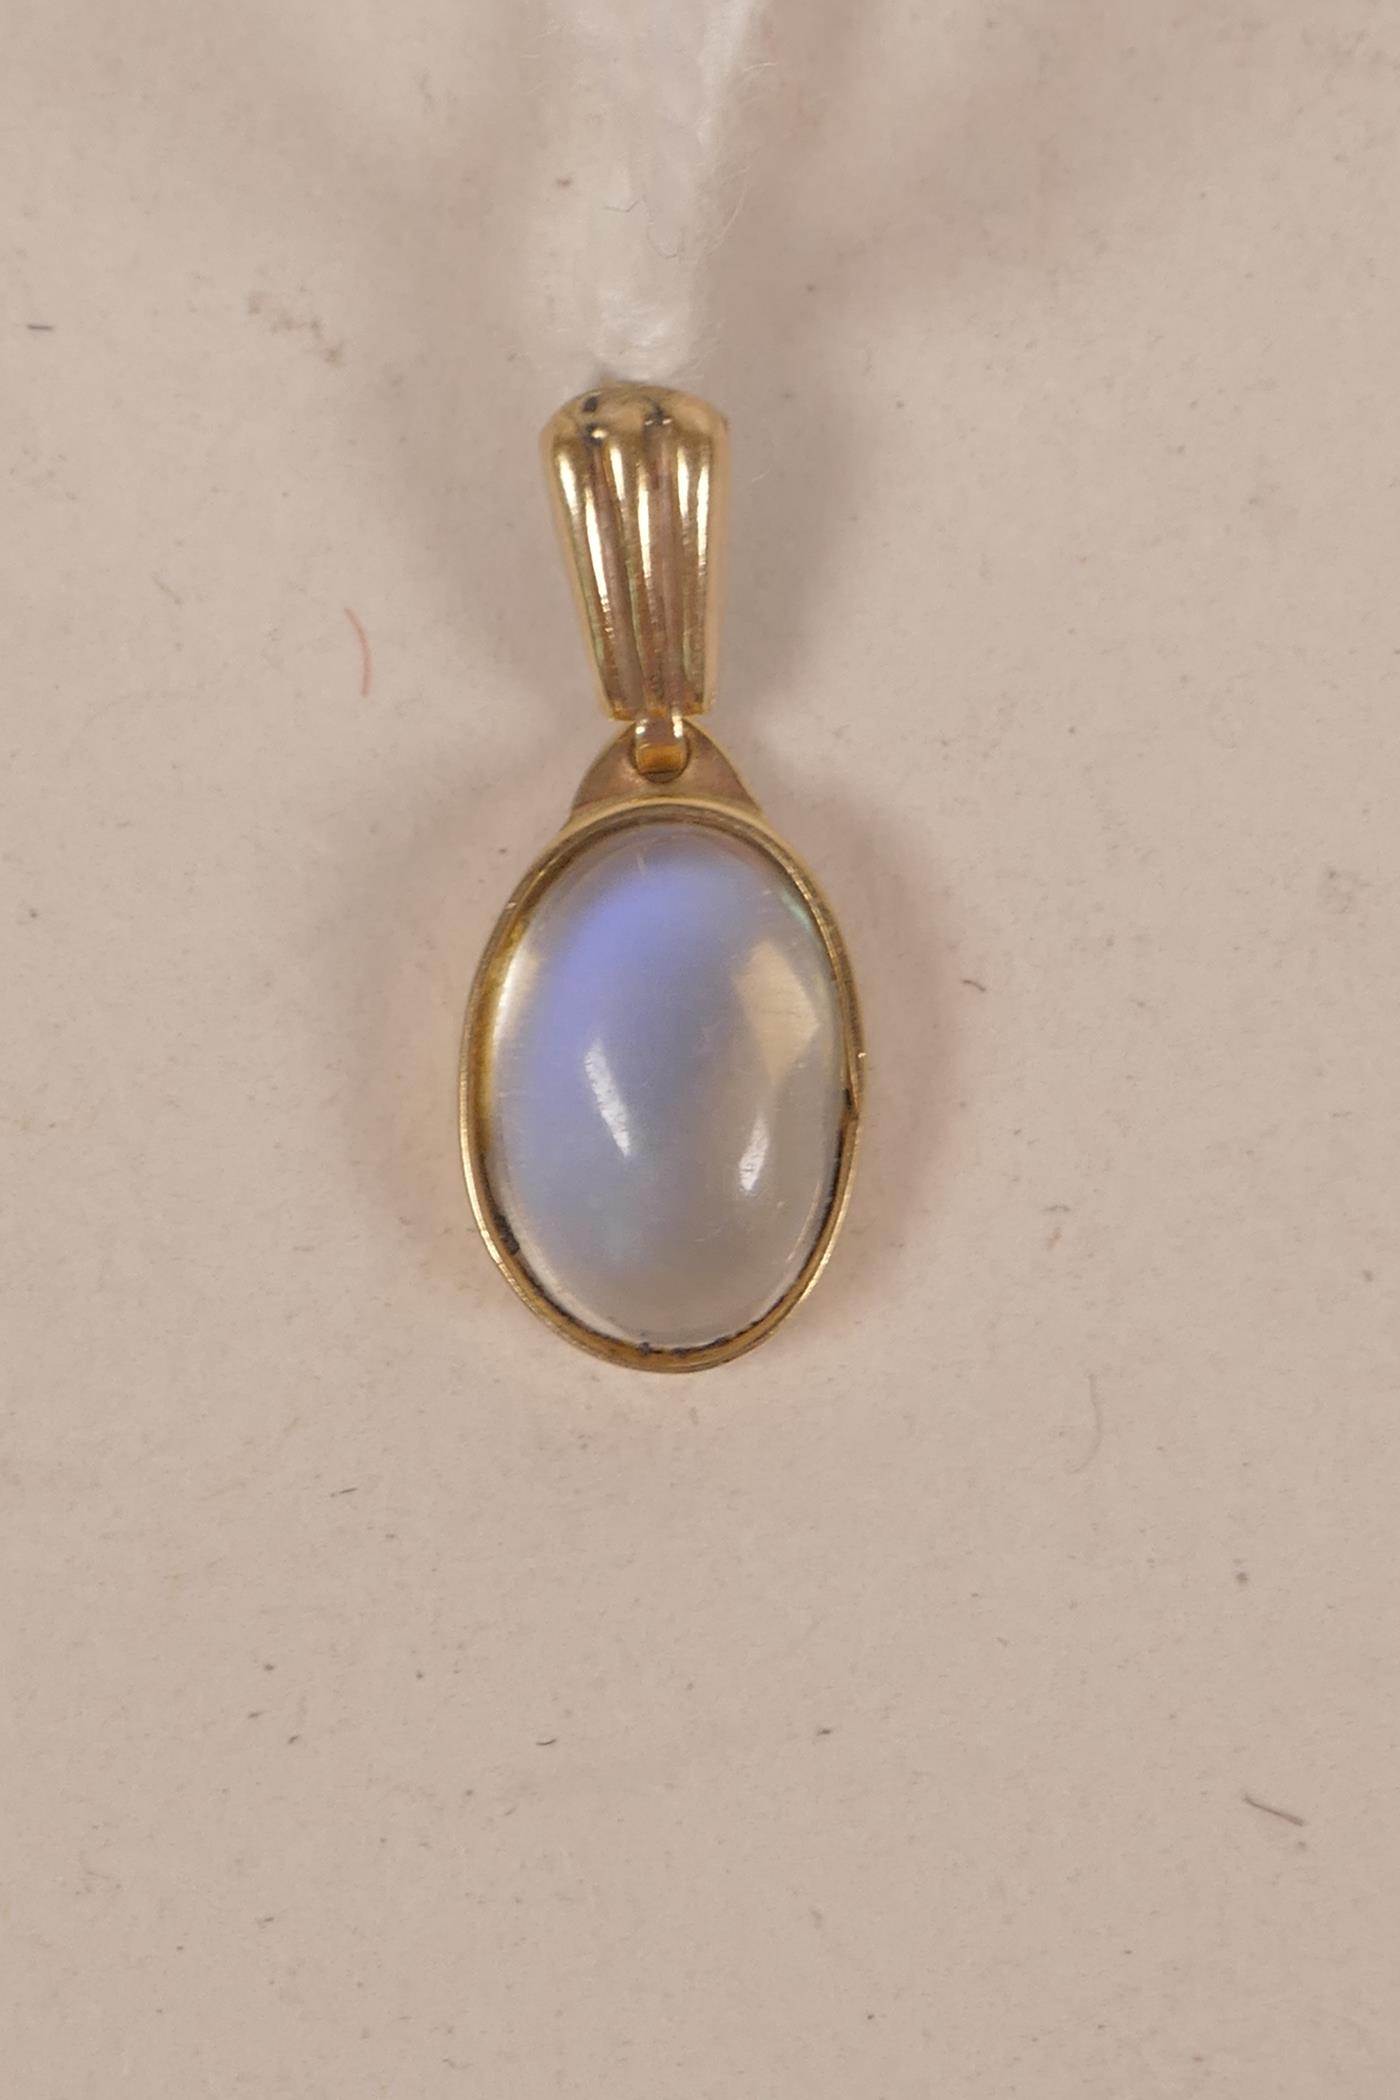 A yellow metal pendant set with a moonstone